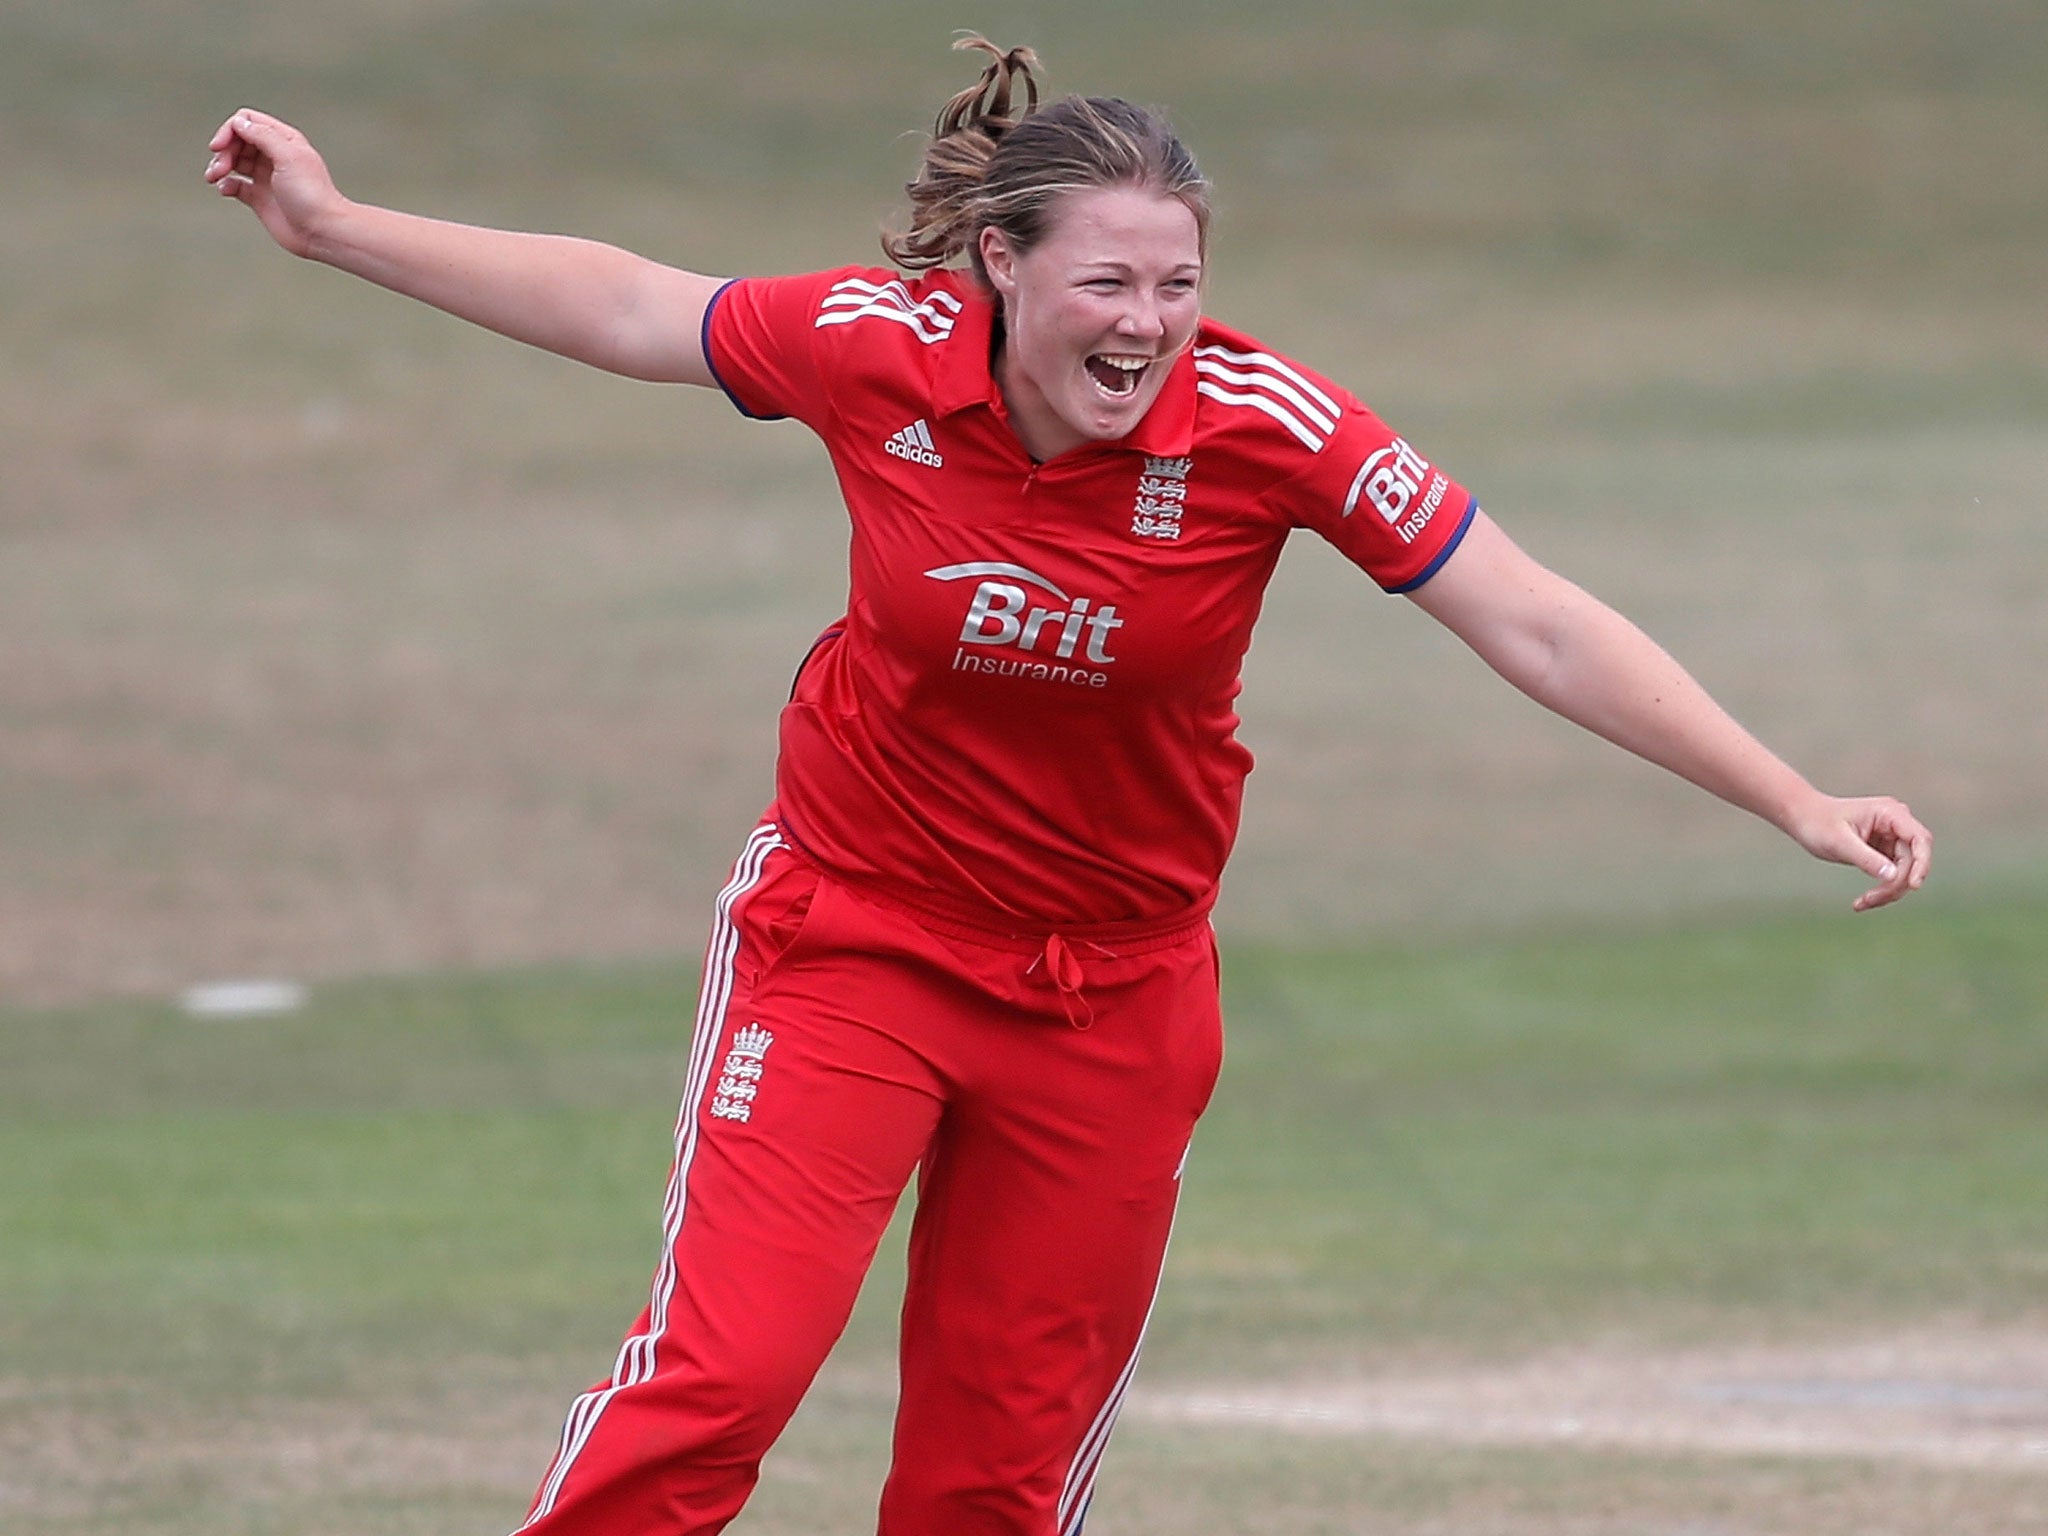 England’s Anya Shrubsole is the leading wicket-taker in Bangladesh with impressive figures of 10-57